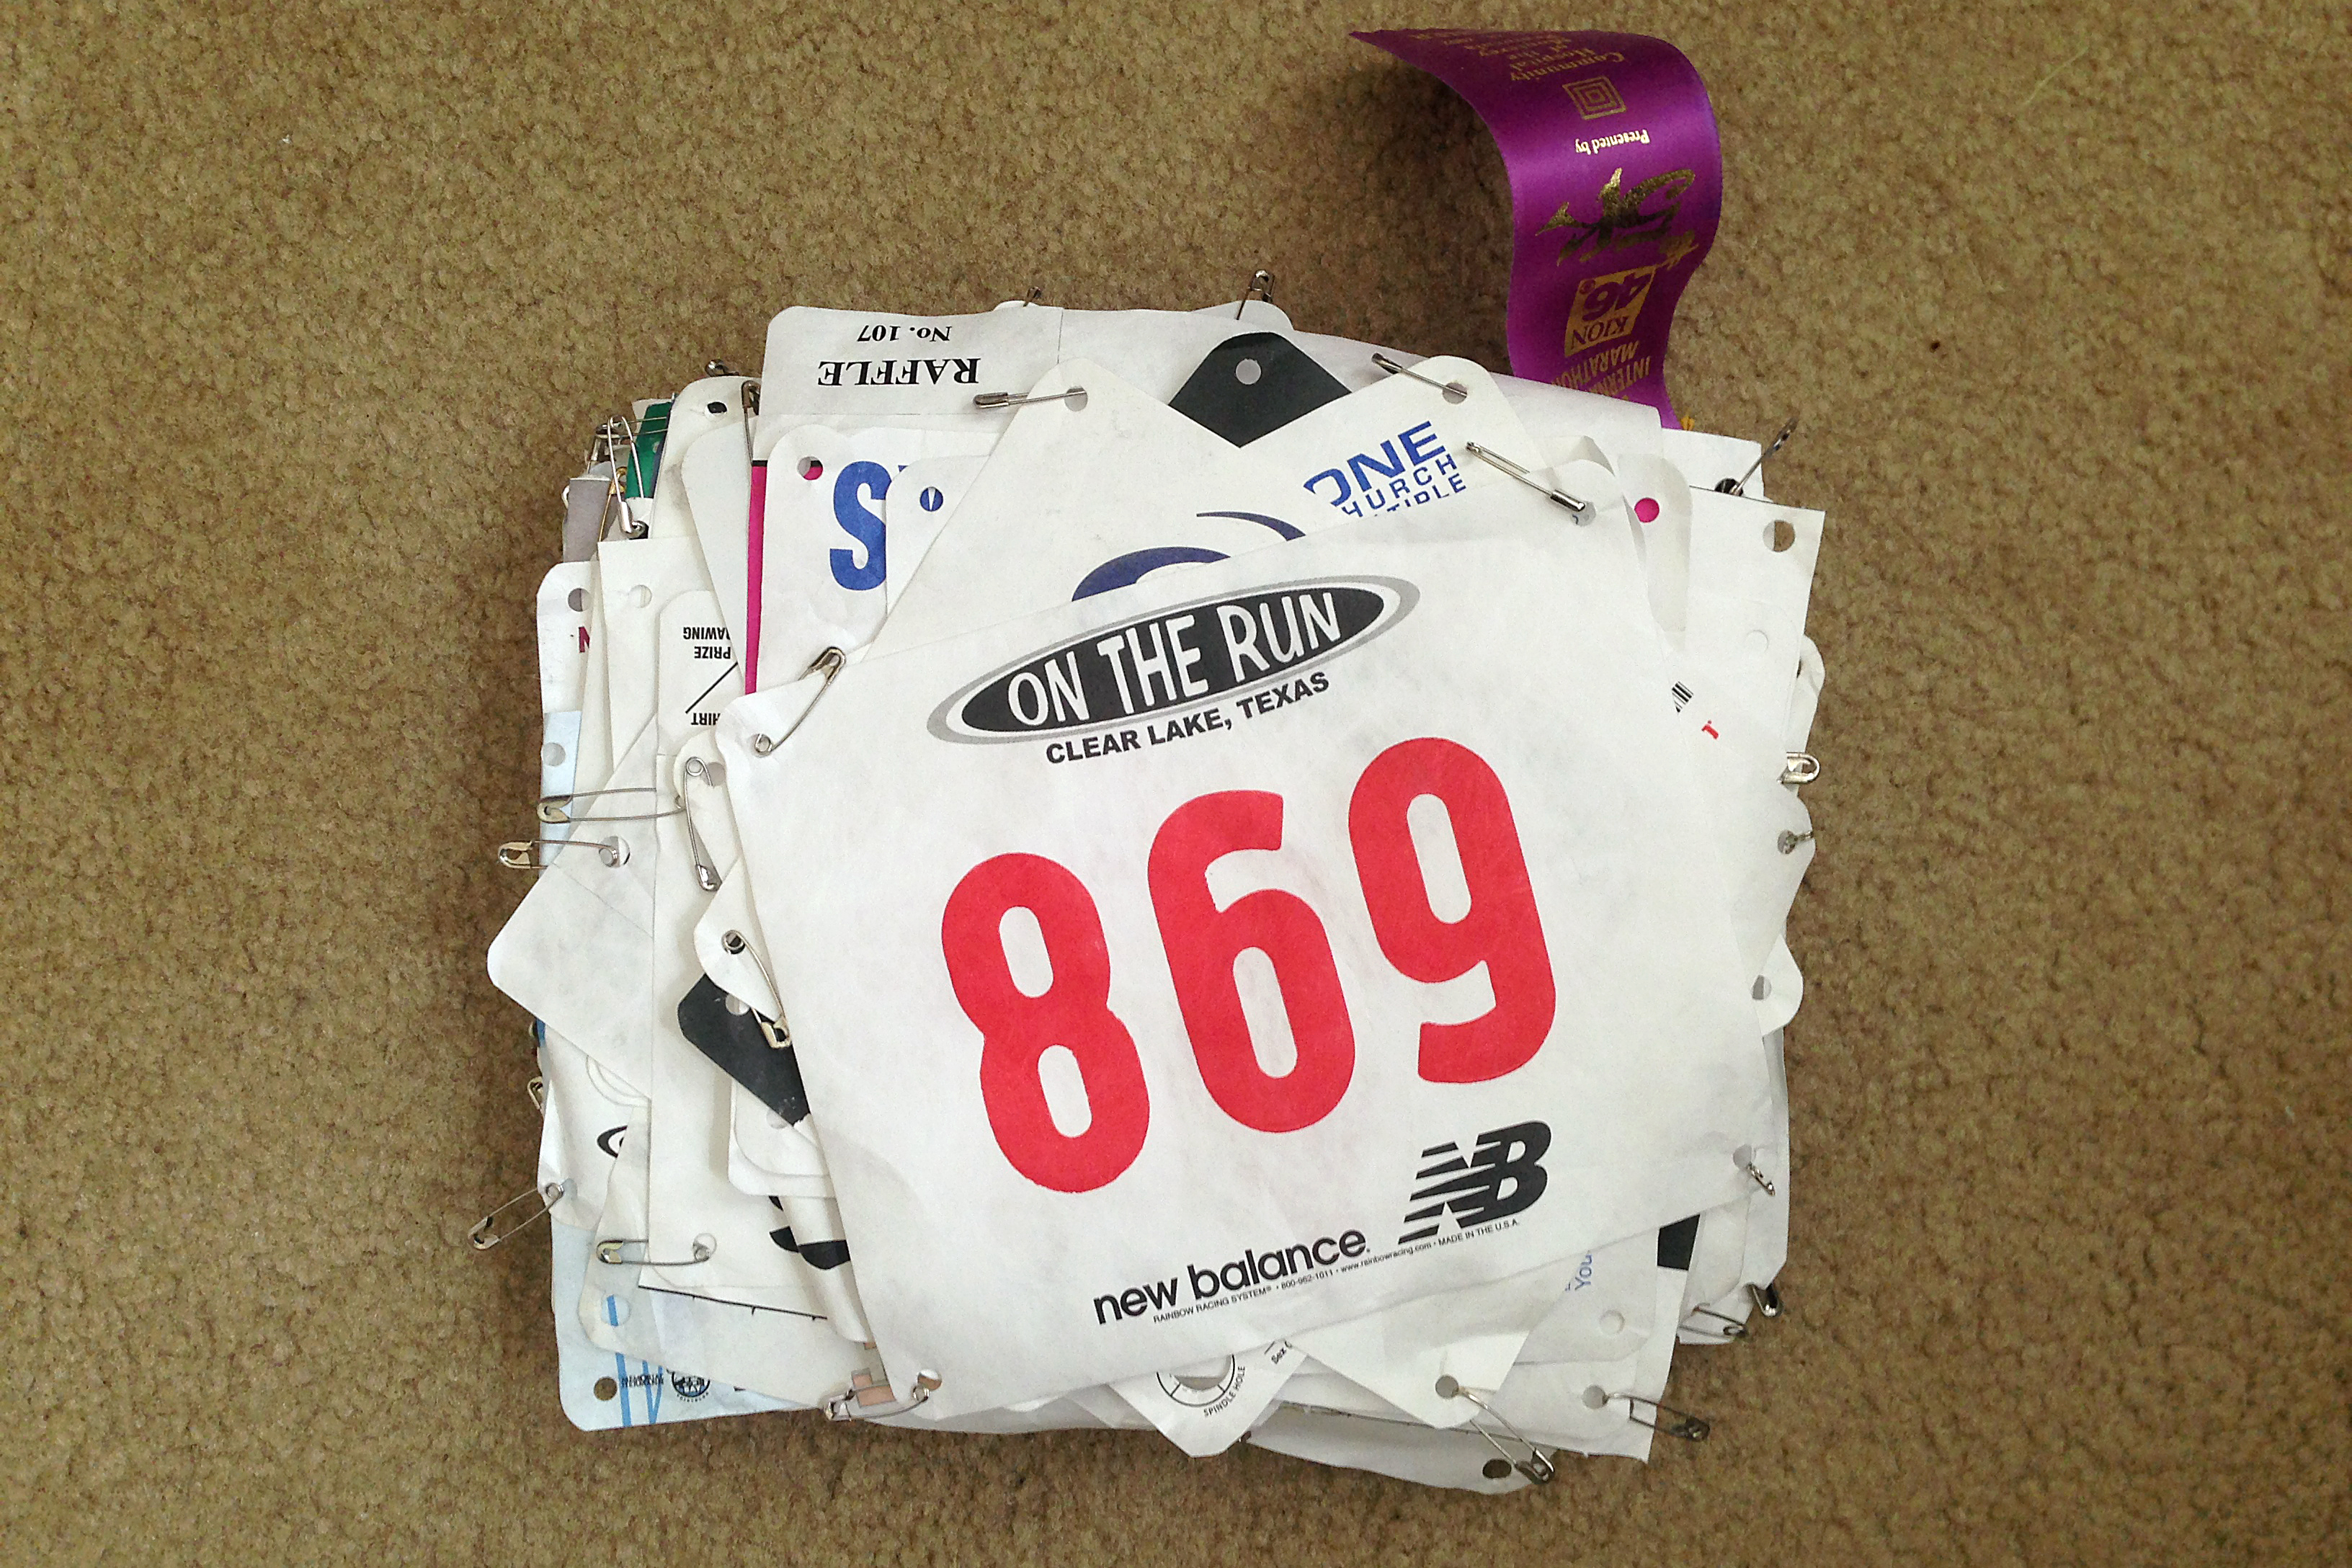 What Do You Do with Race Bibs?